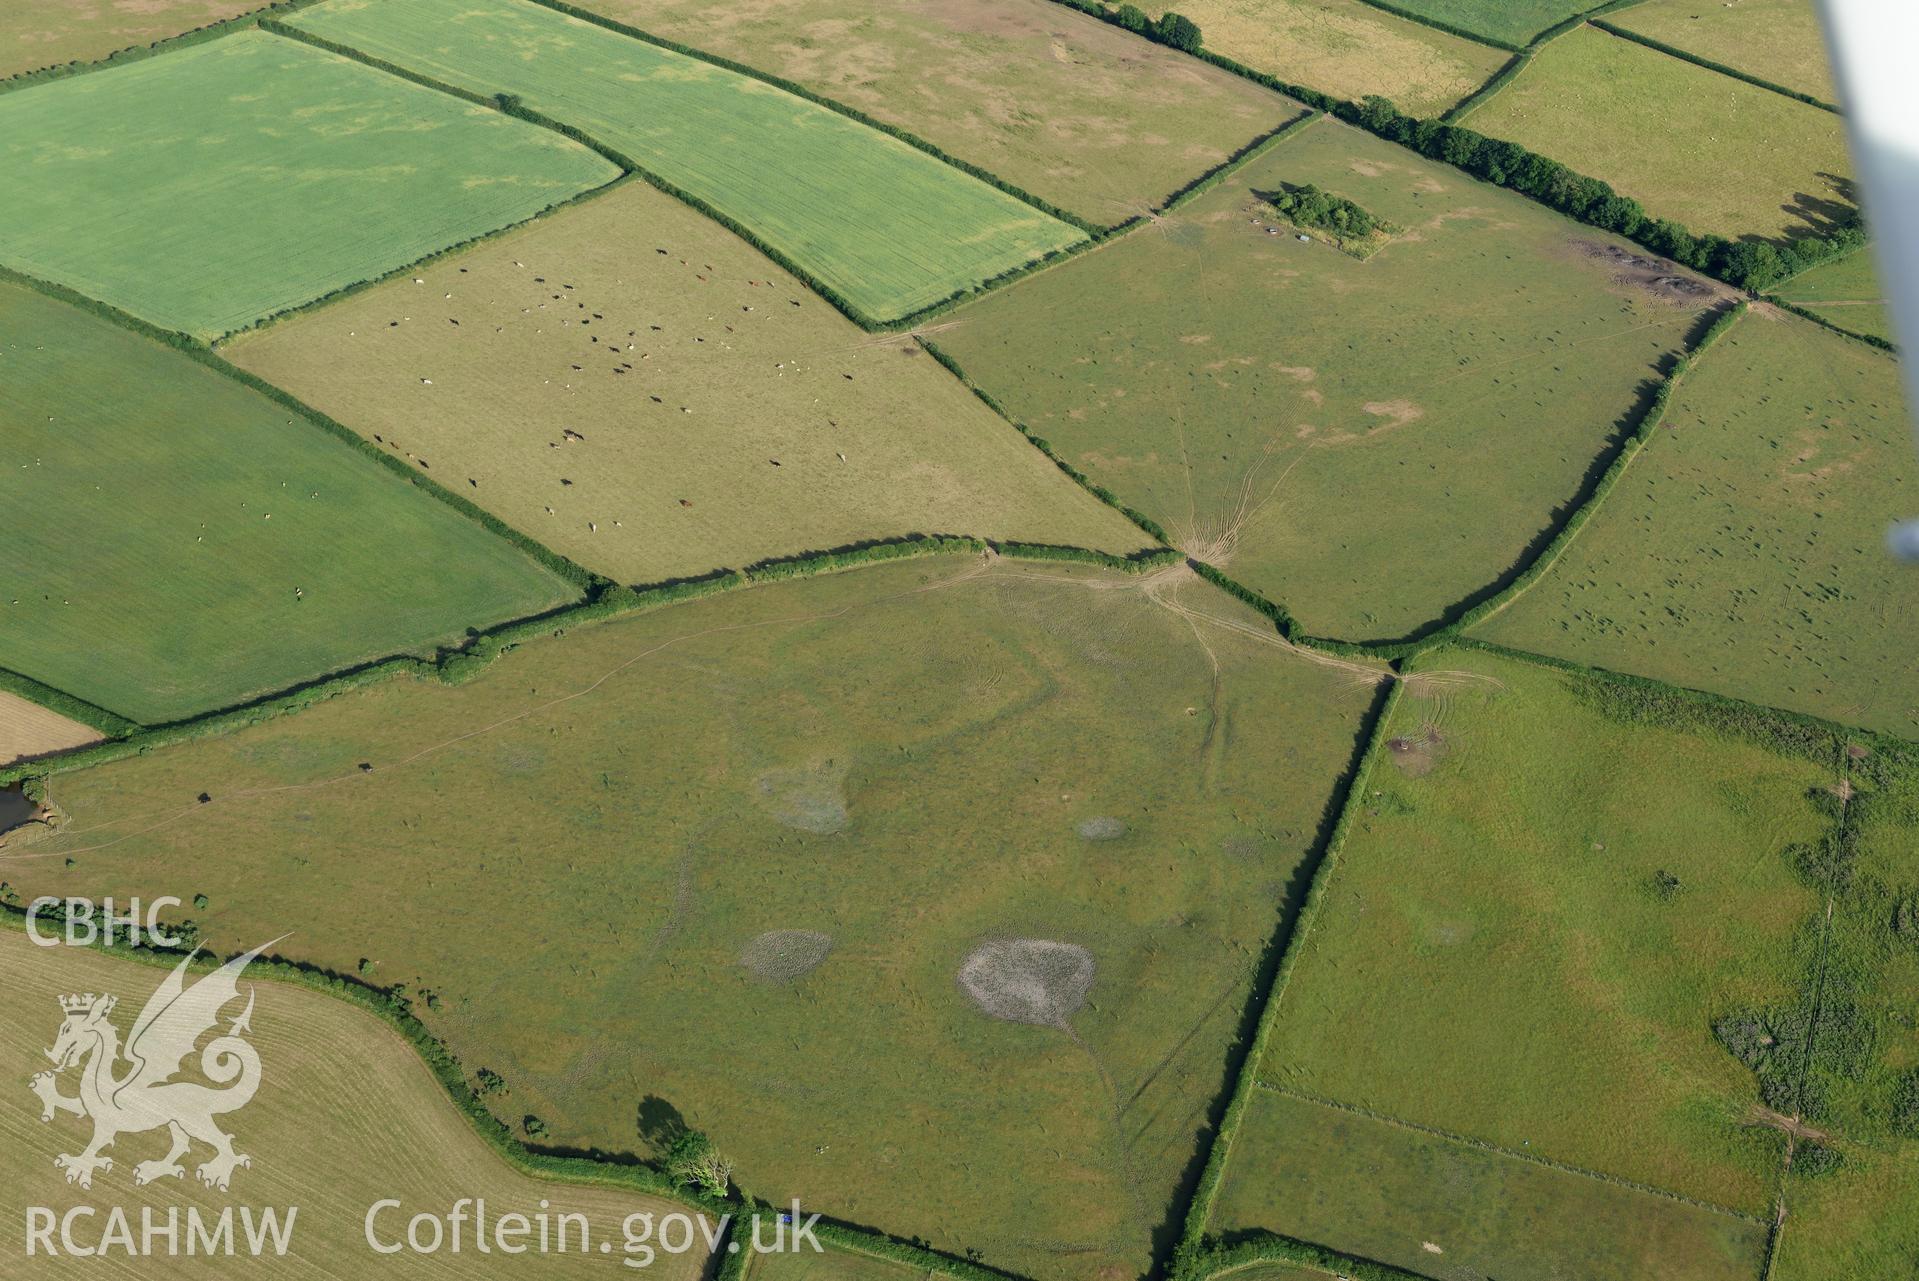 Royal Commission aerial photography of earthworks southwest of Llanddewi Church, with parching, taken on 17th July 2018 during the 2018 drought.